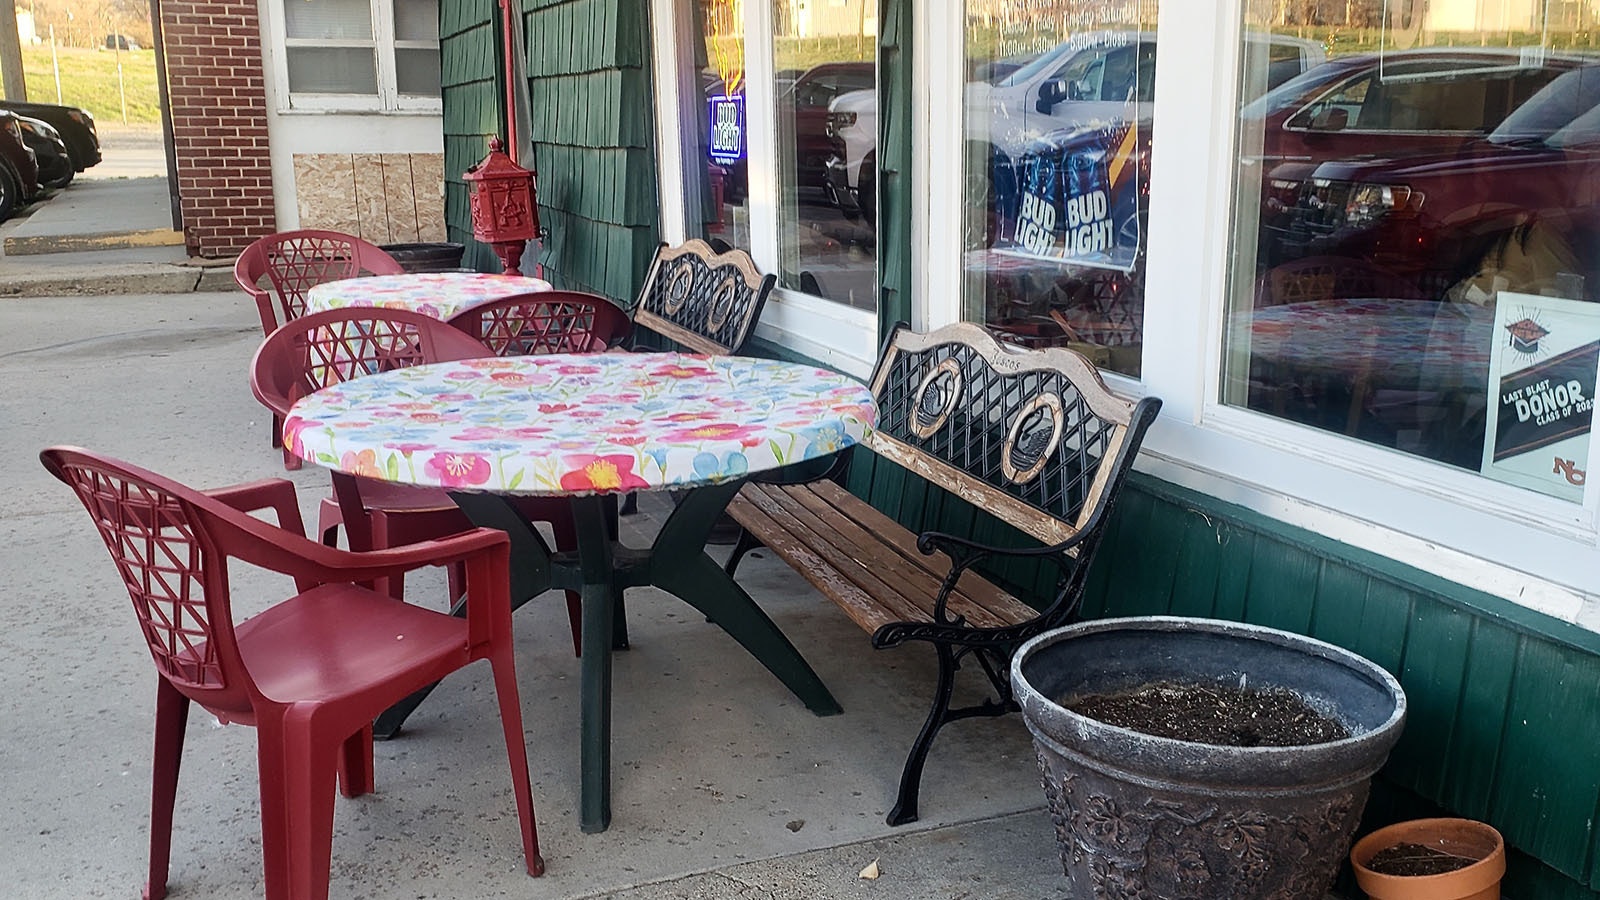 Bosco's patio seating is available when the weather is nice.